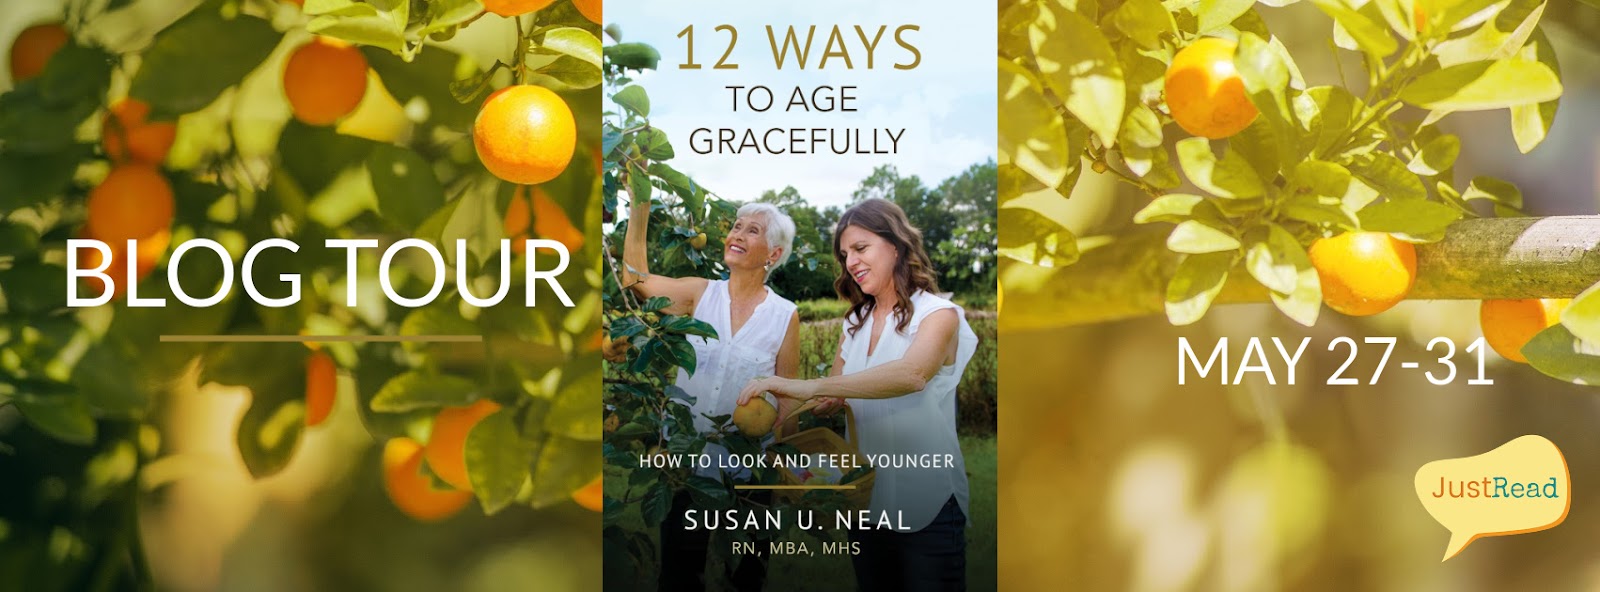 12 Ways to Age Gracefully JustRead Blog Tour